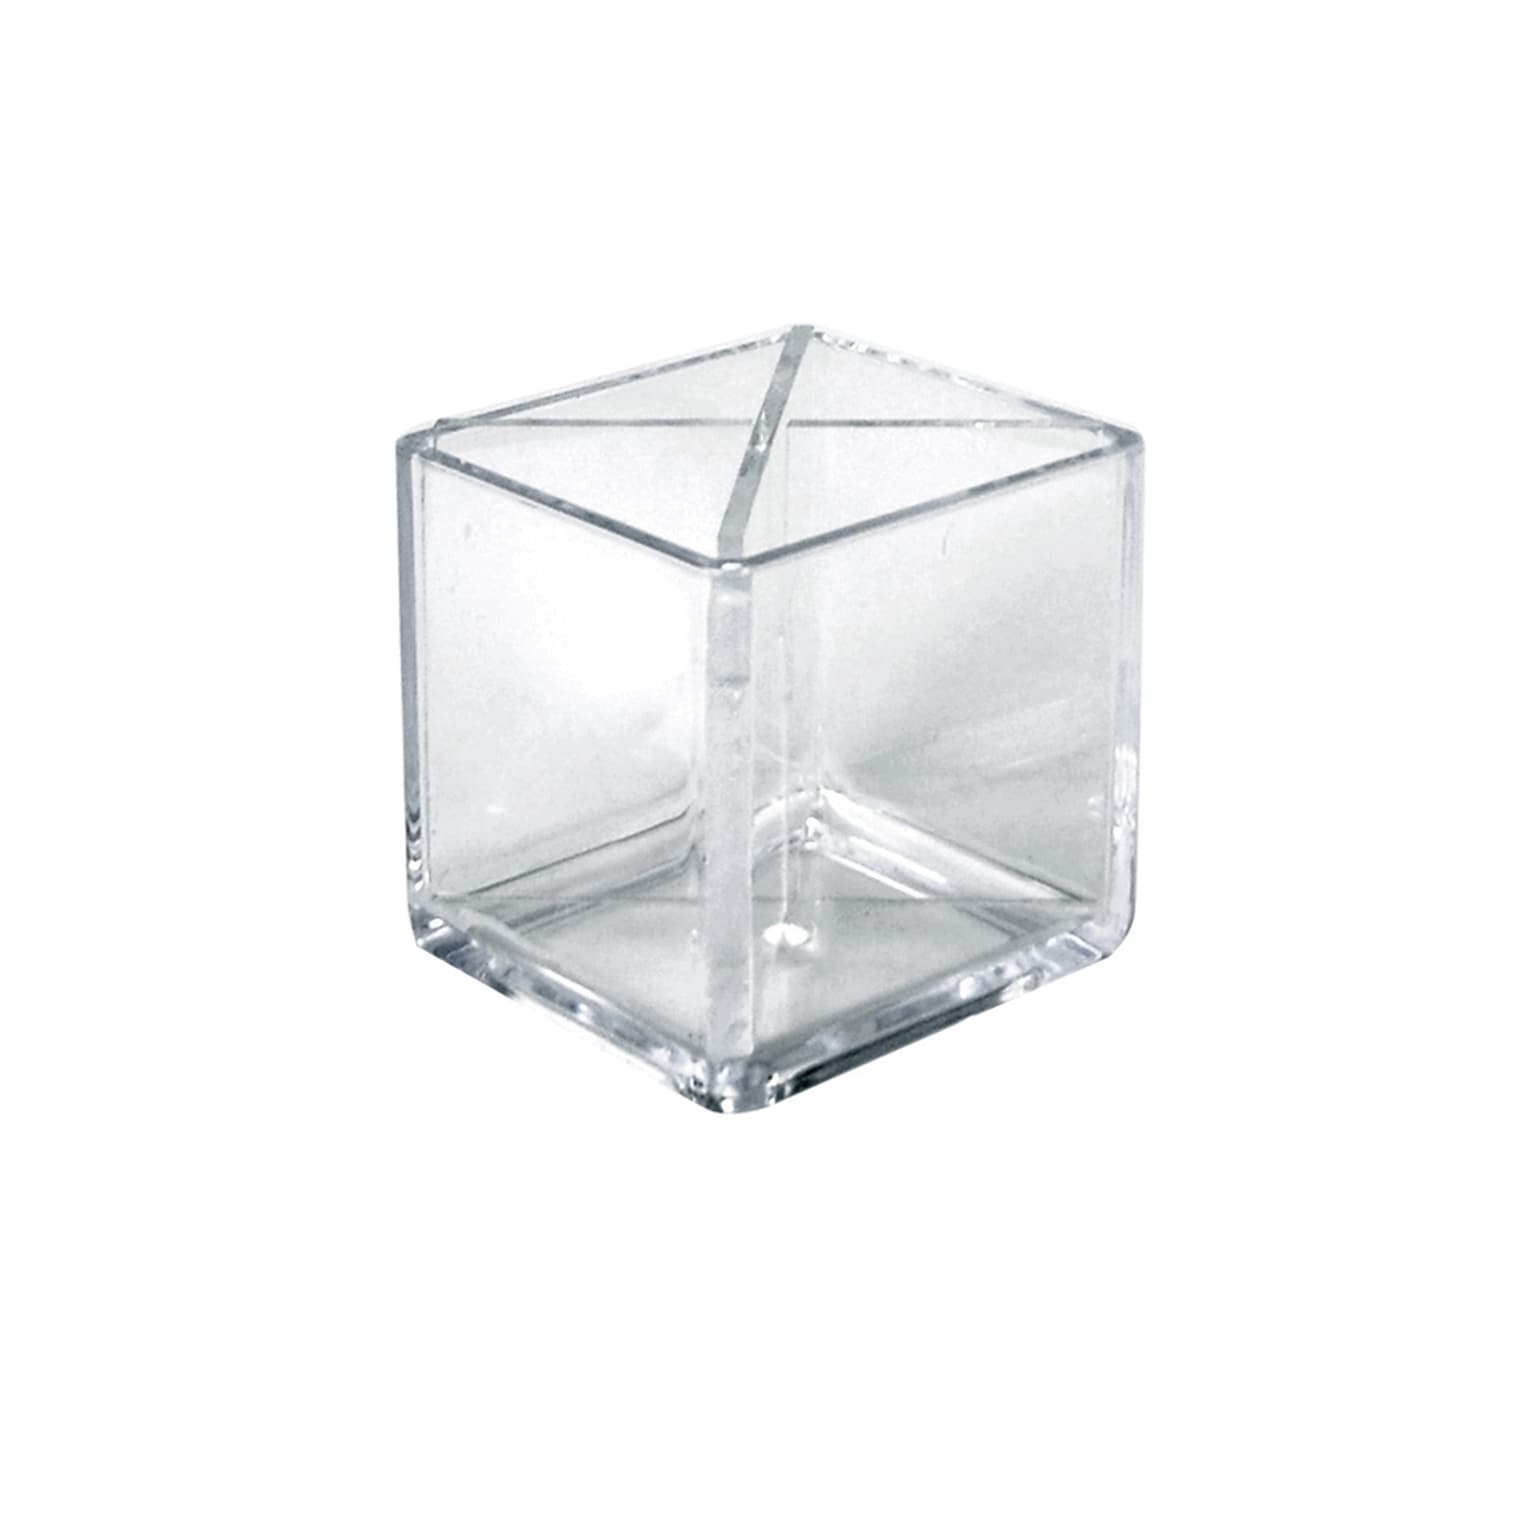 4 Cube Pencil Holder with Divider Pack of 2